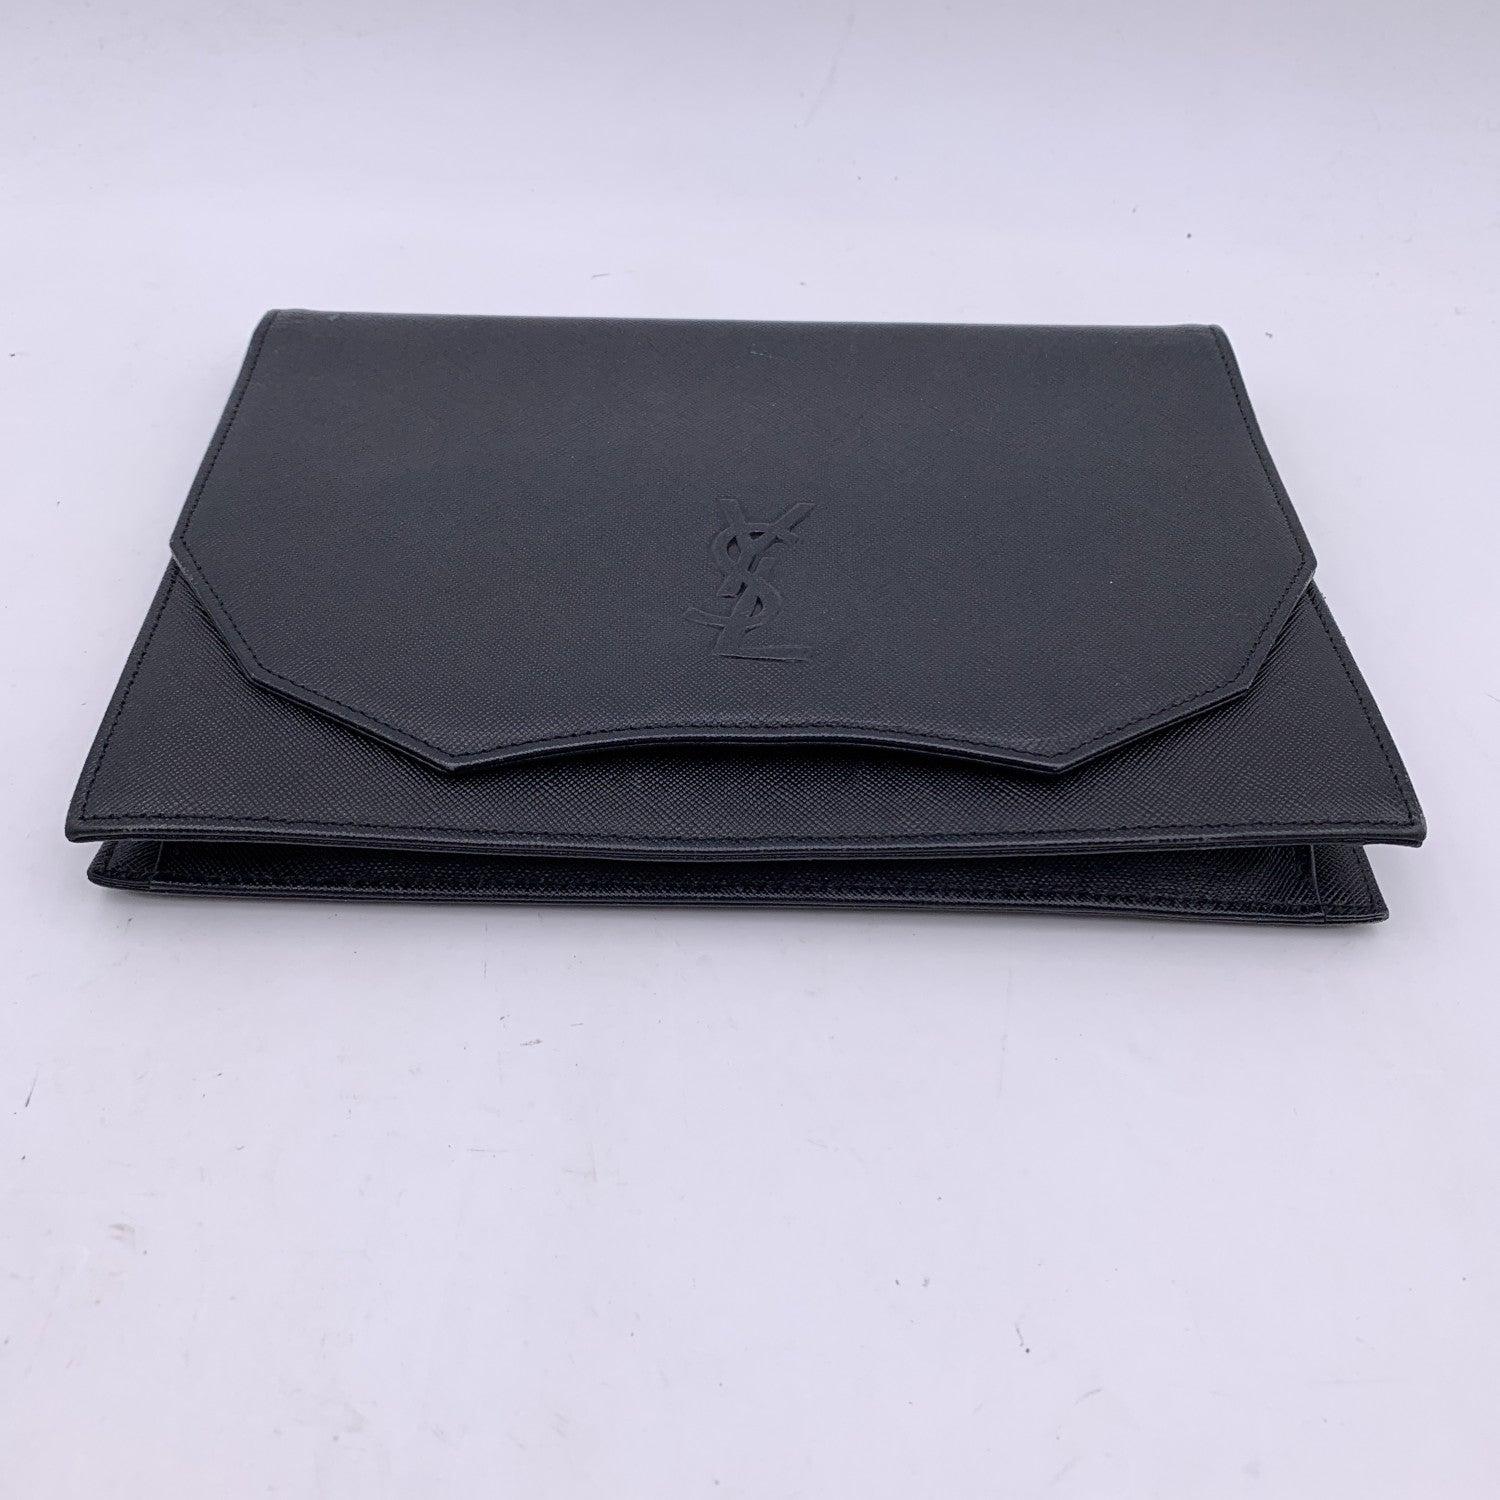 Yves Saint Laurent vintage clutch bag, crafted in black leather. It features a flap with magnetic button closure on the front. YSL logo on the front. 1 rear open pocket. Black fabric lining. 1 side zip pocket inside. 'YVES SAINT LAURENT'embossed